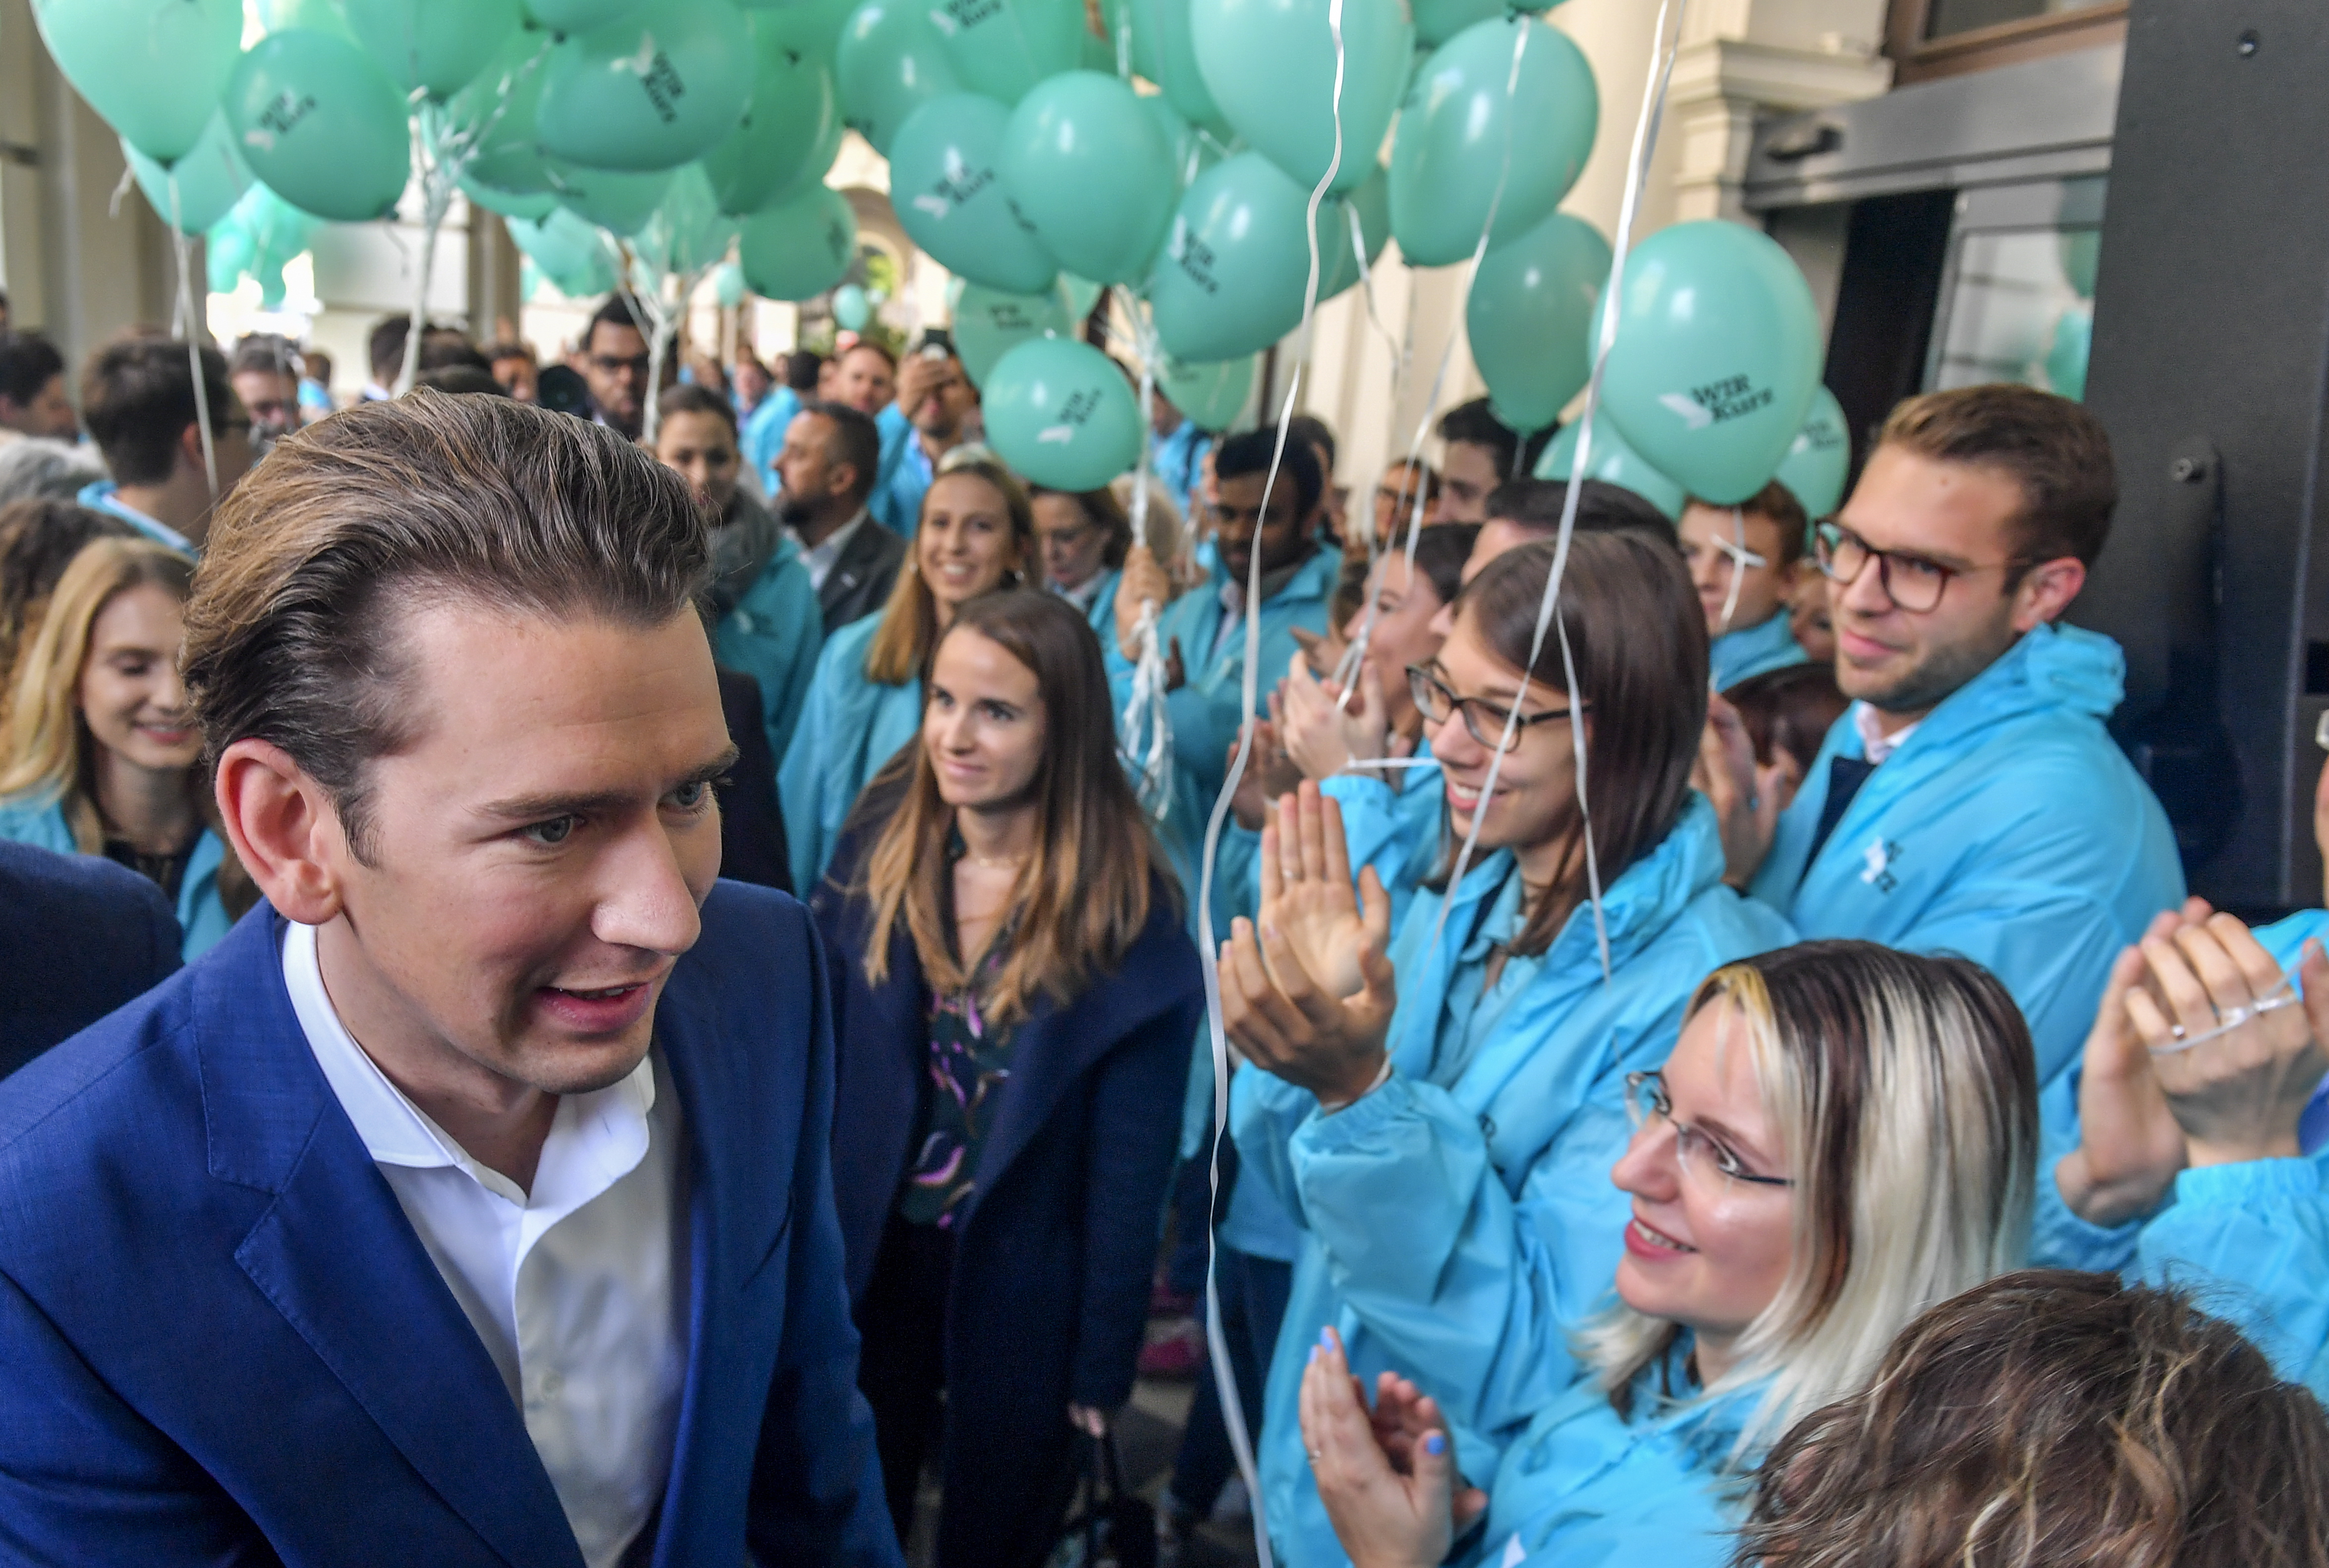 epa07872876 Sebastian Kurz, leader of the Austrian People's Party (Oevp) and candidate for the upcoming Austrian federal elections, greets his supporters during an Oevp election campaign event in Vienna, Austria, 27 September 2019. The Austrian federal elections will take place on 29 September 2019.  EPA/GEORGI LICOVSKI